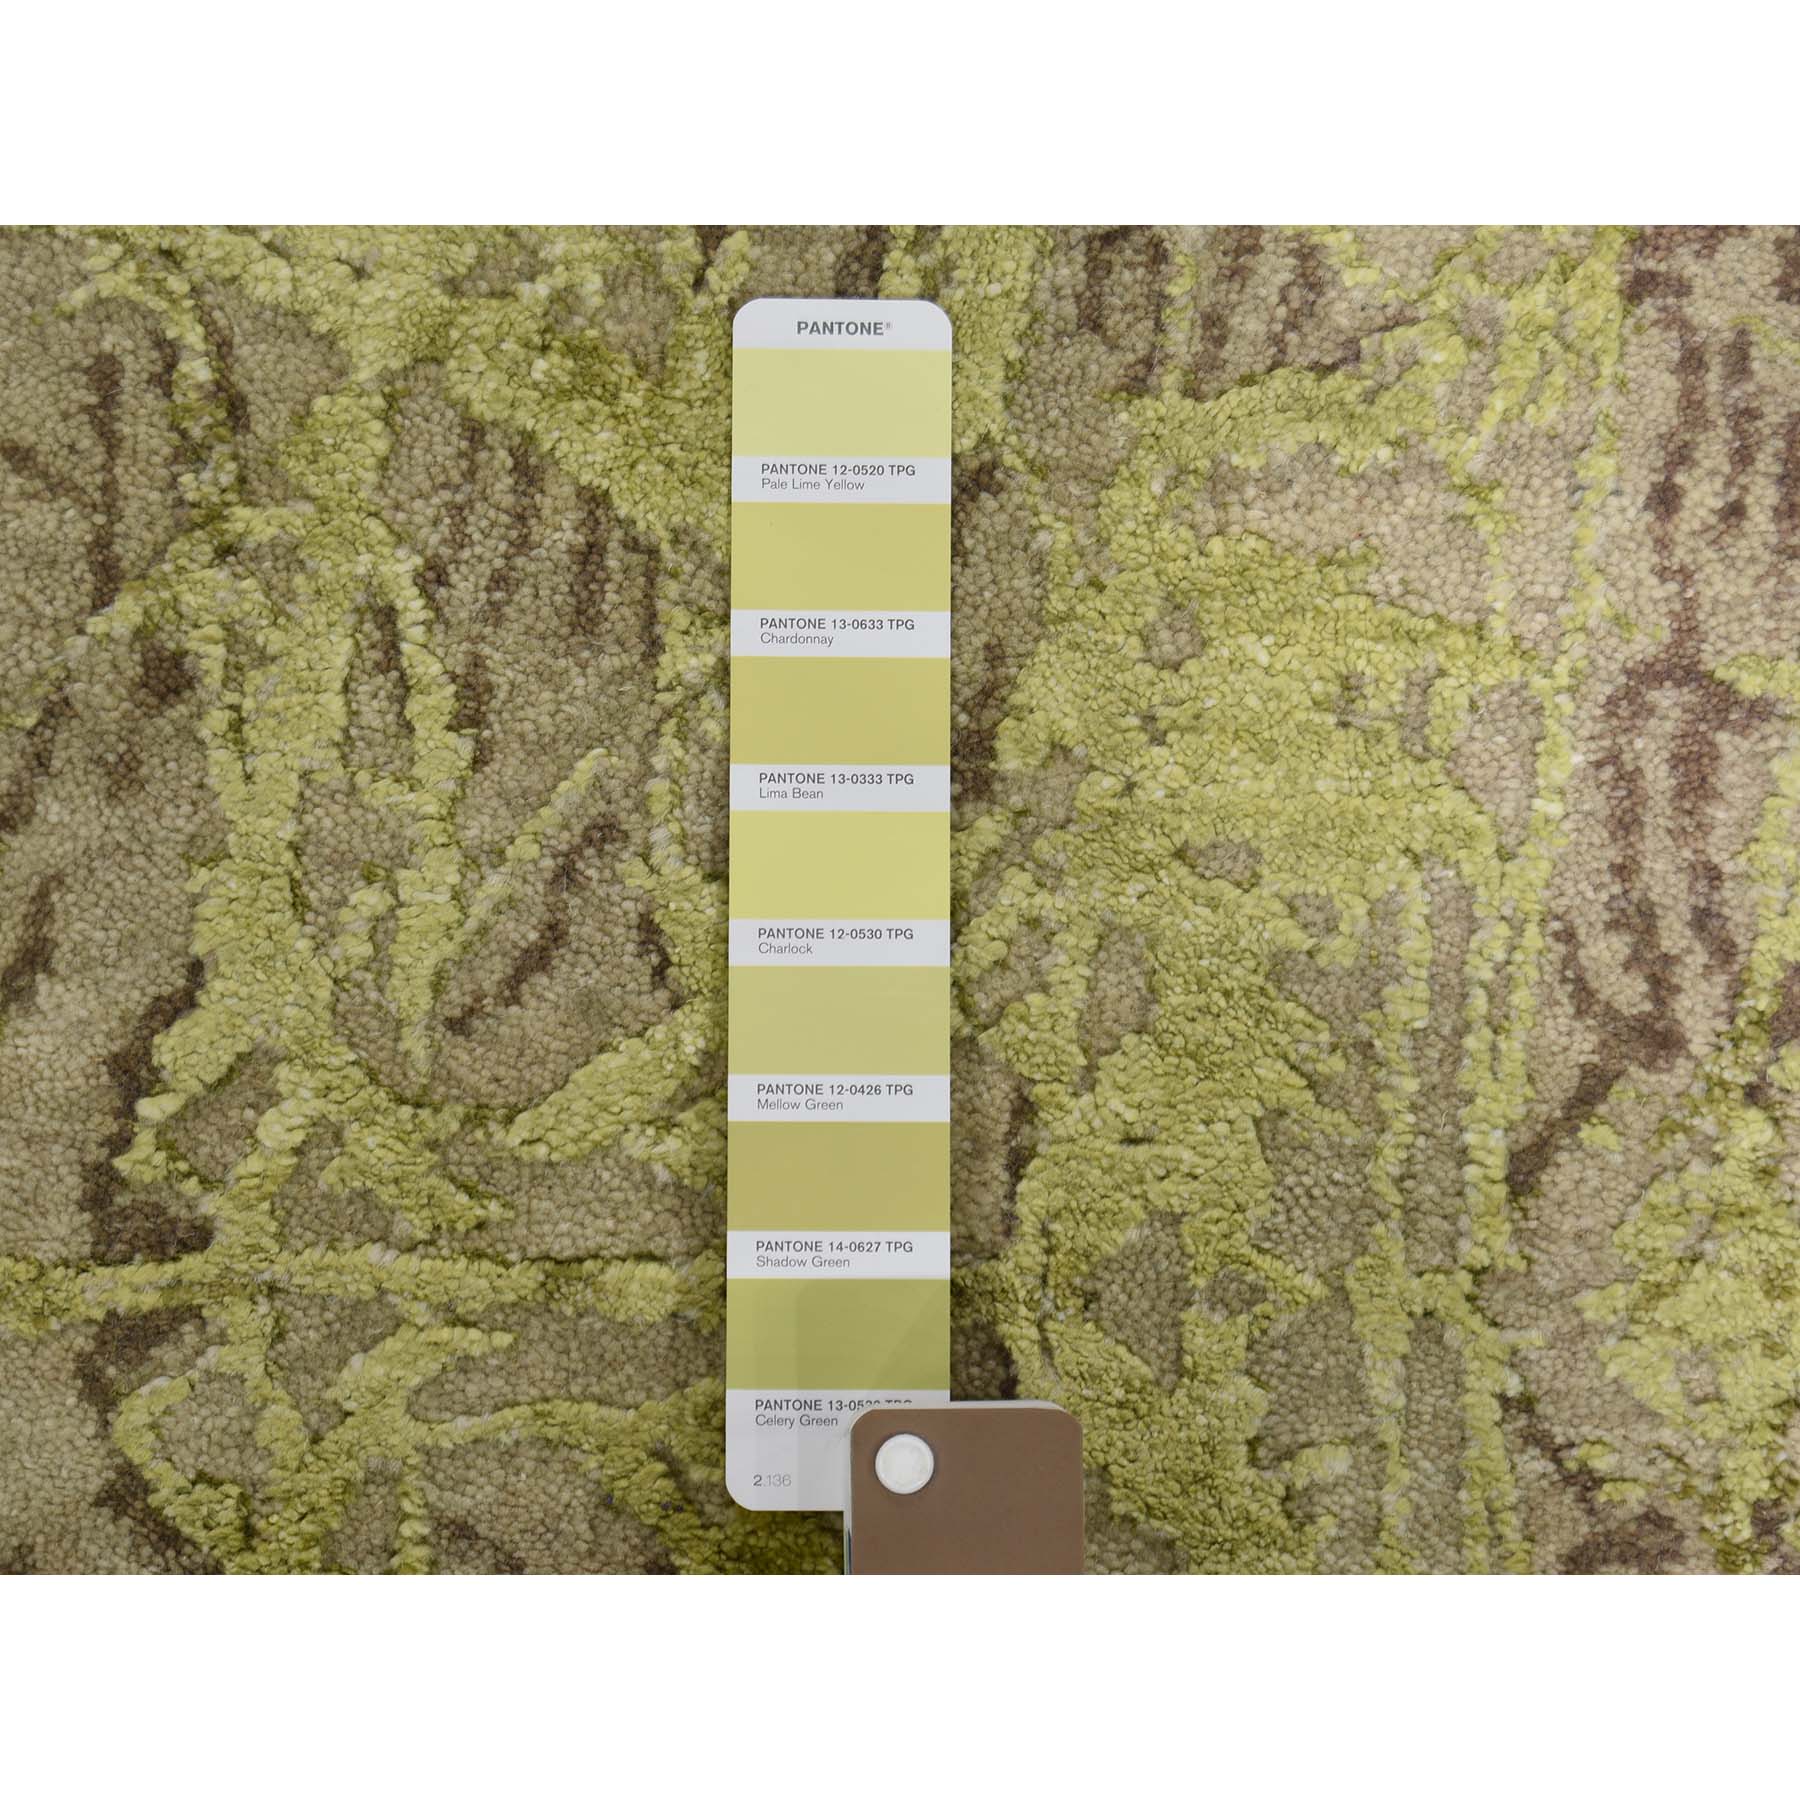 9-x11-9  Light Green Tone On Tone Wool And Silk Abstract Design Hand-Knotted Oriental Rug 